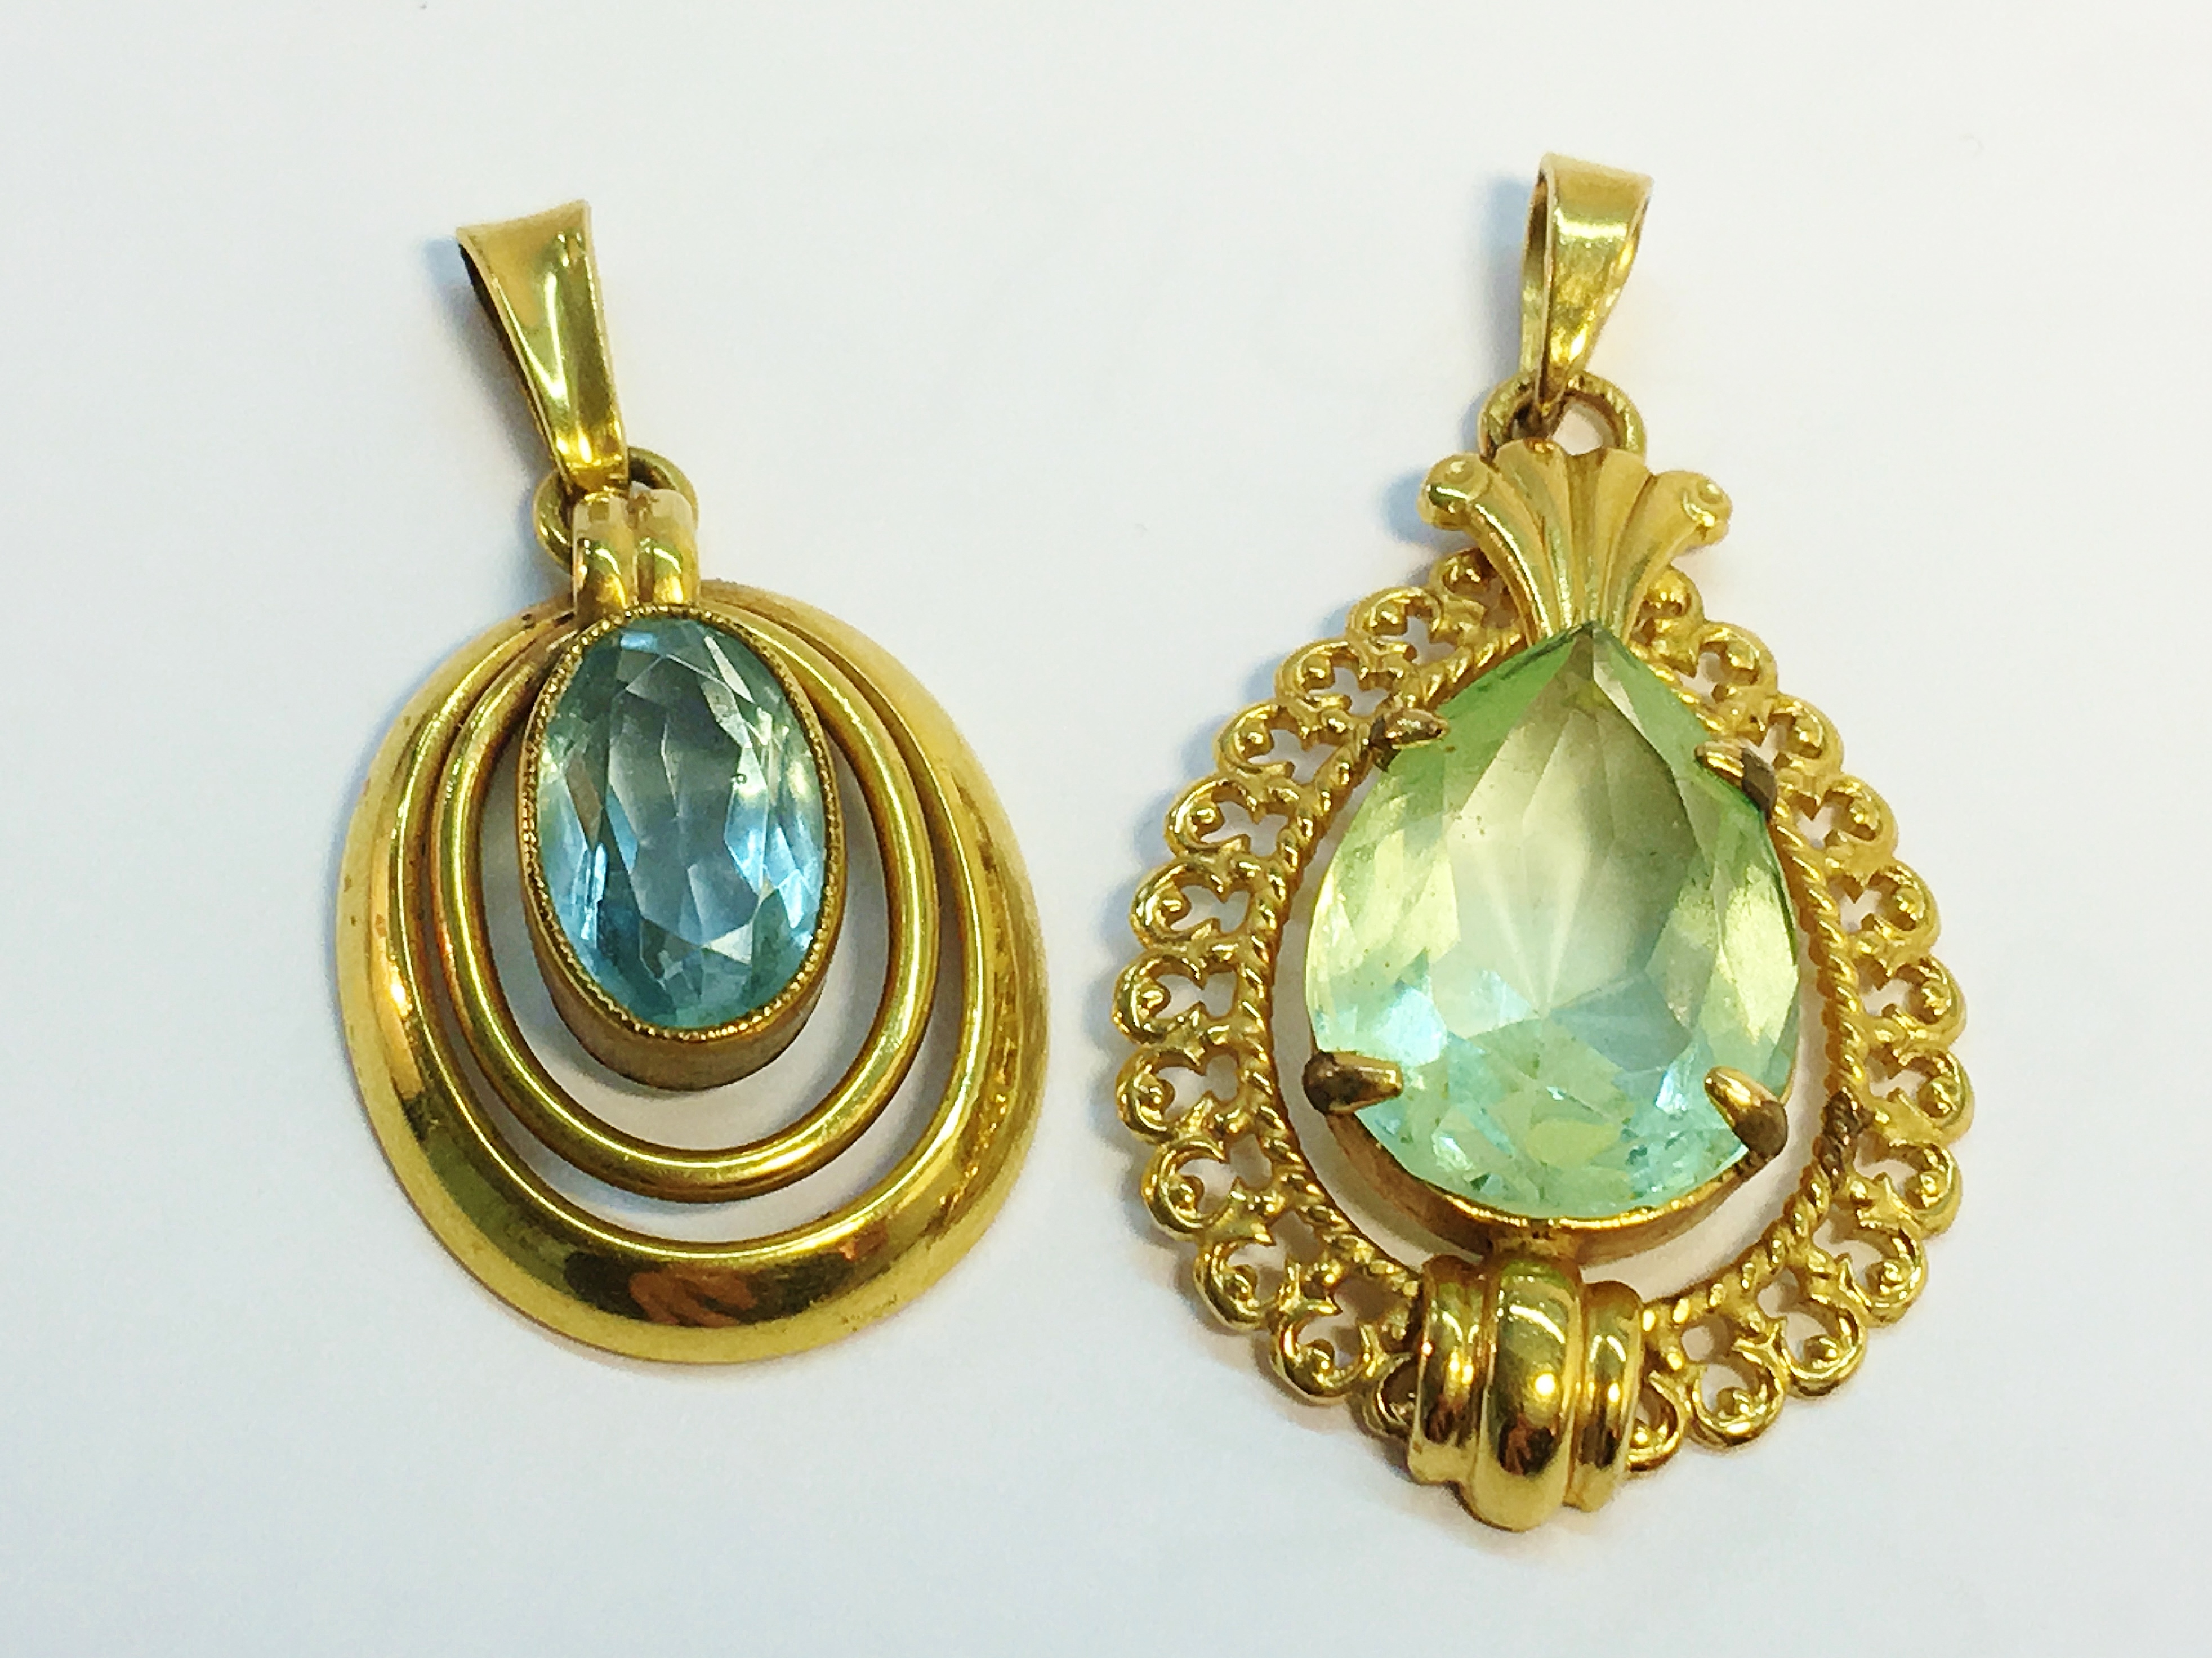 An Art Deco pendant in 9ct gold set with an oval cut blue stone, branded Amerikaner, weight 4.